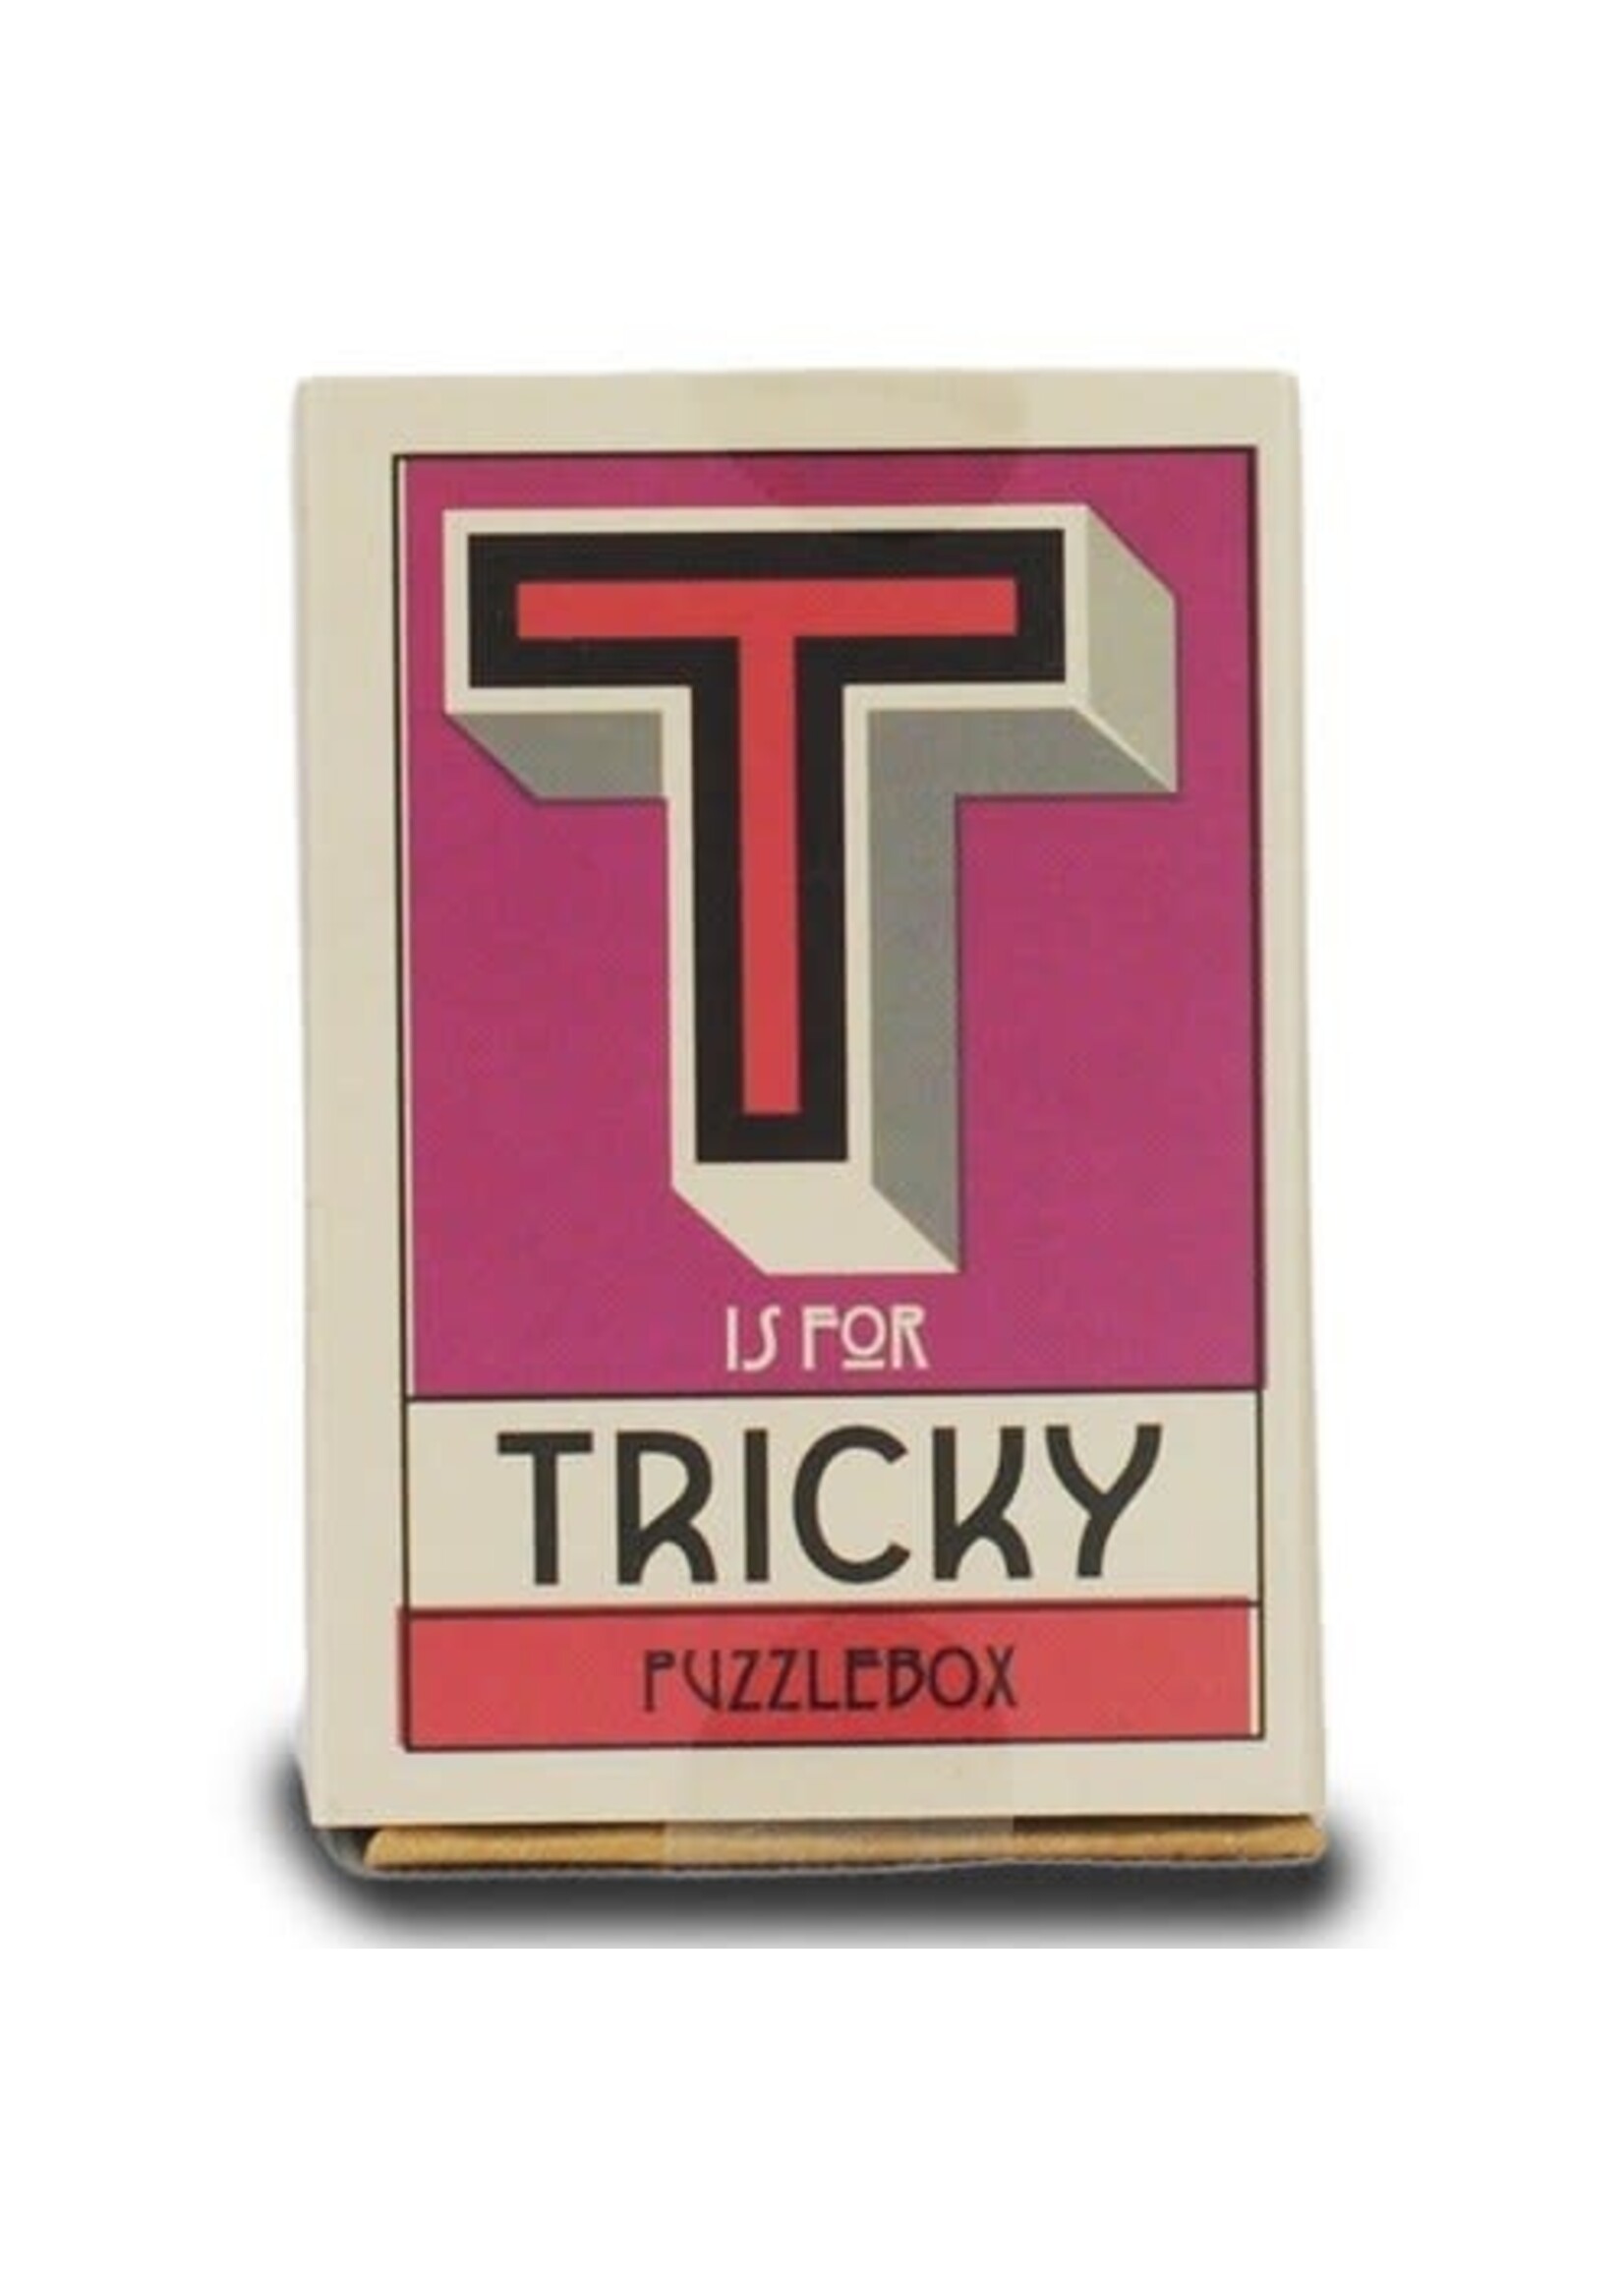 Project Genius Puzzlebox Matchbox-Sized Brainteaser Puzzle - T is for Tricky